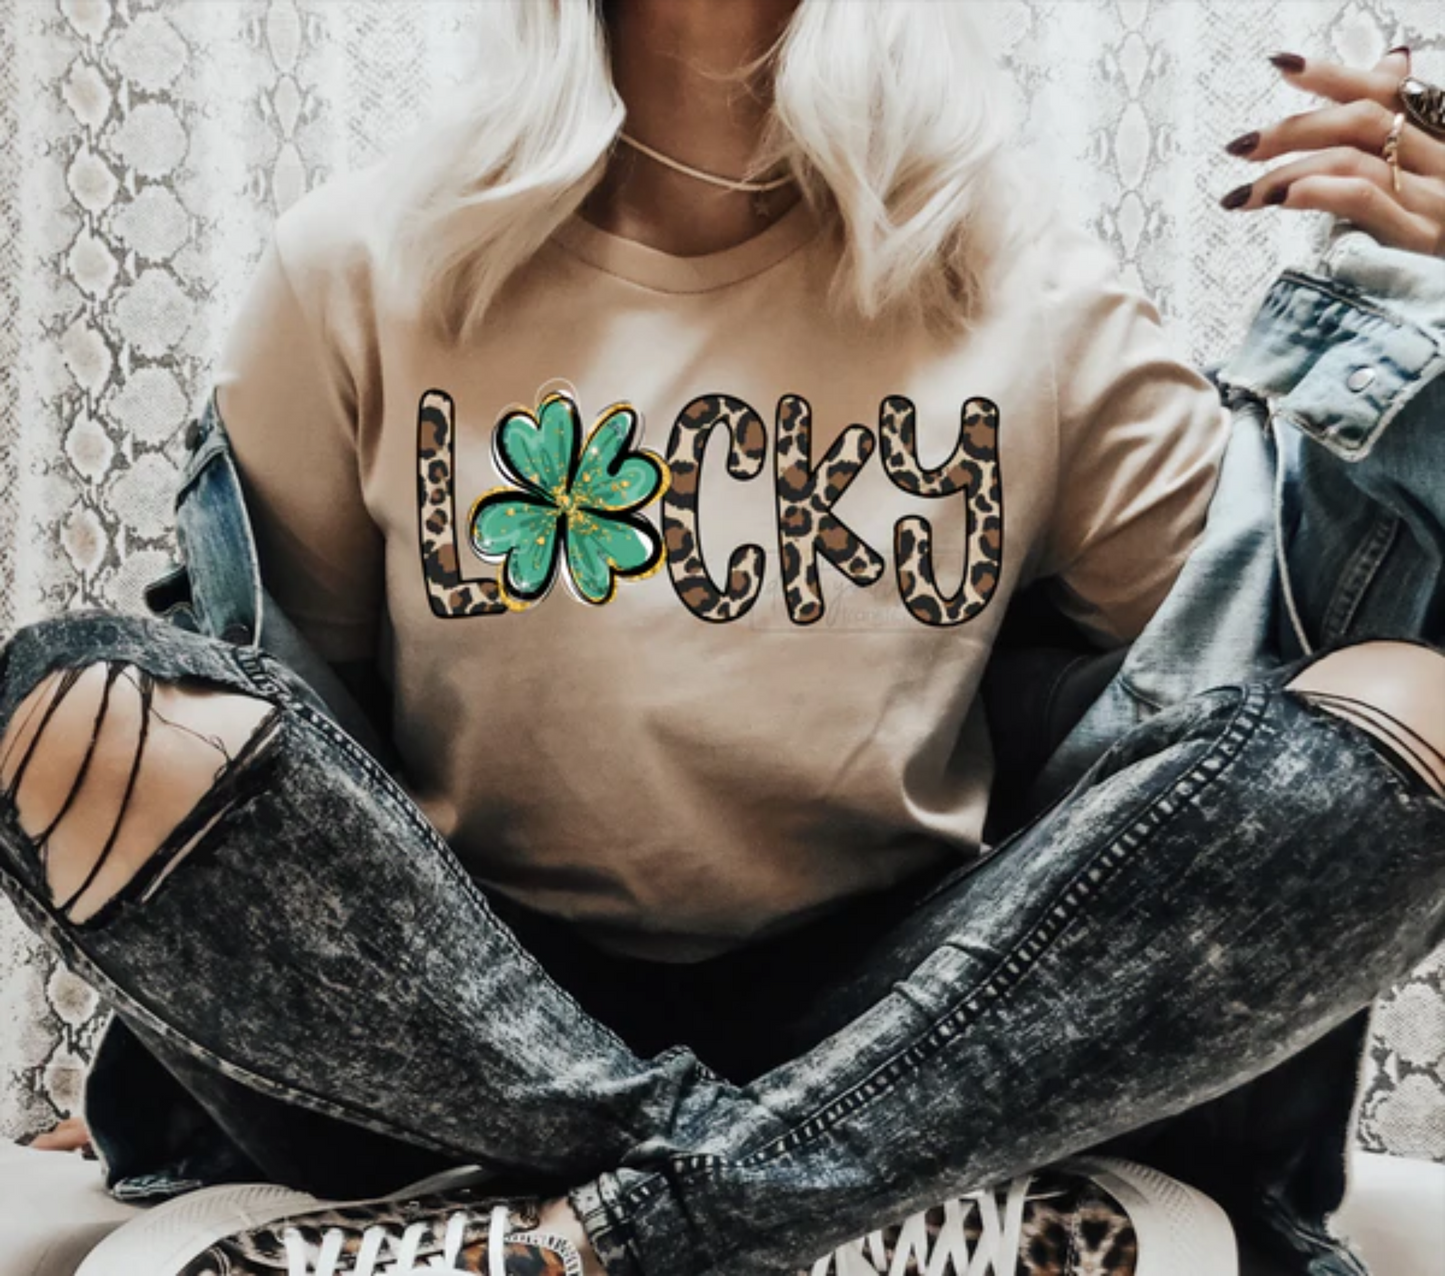 Lucky St. Patrick's Day Tee